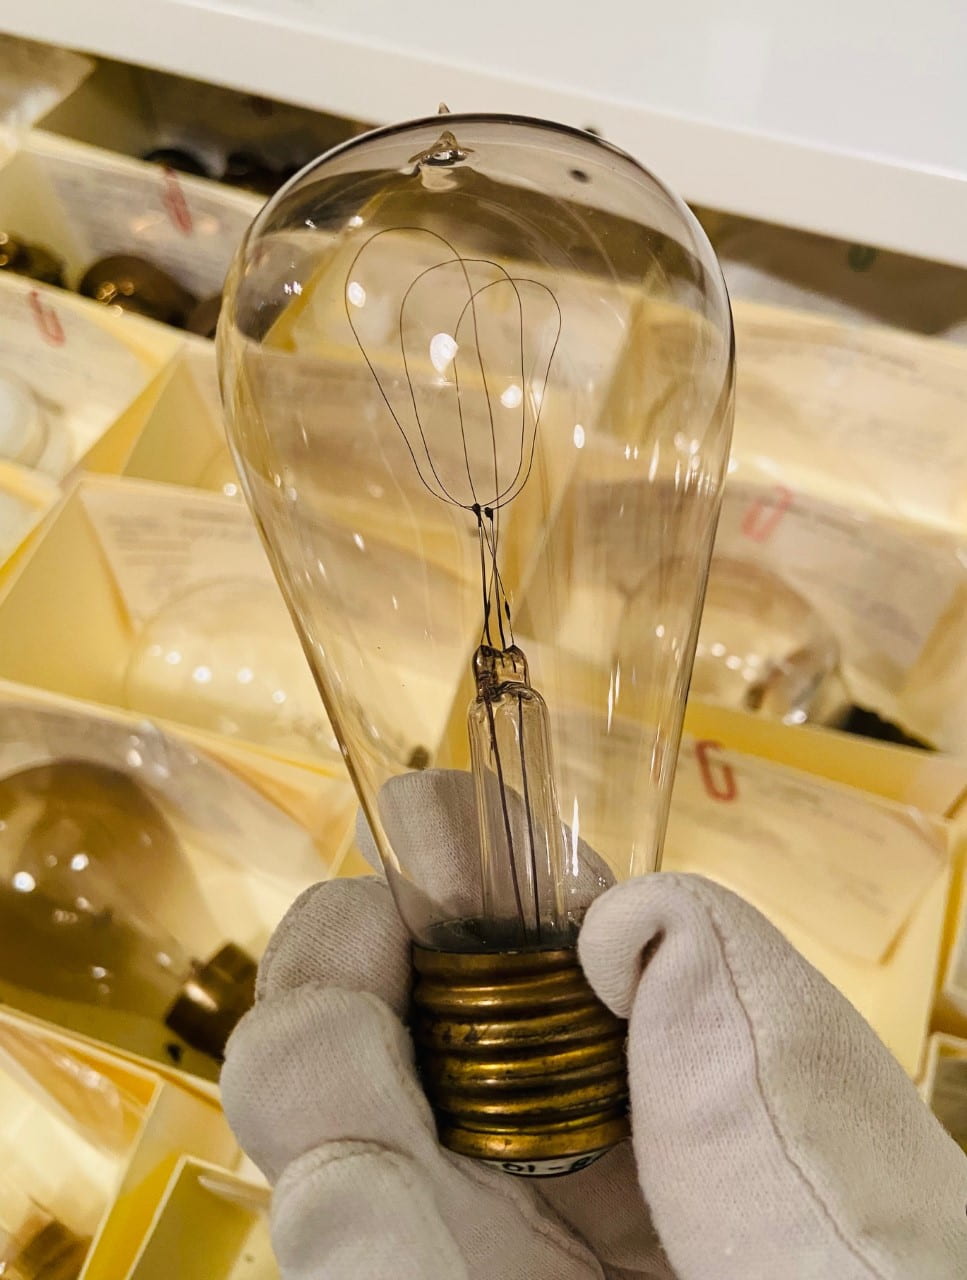 A clear lightbulb held between cotton-gloved fingers. There are more lightbulbs in small boxes behind the featured one.